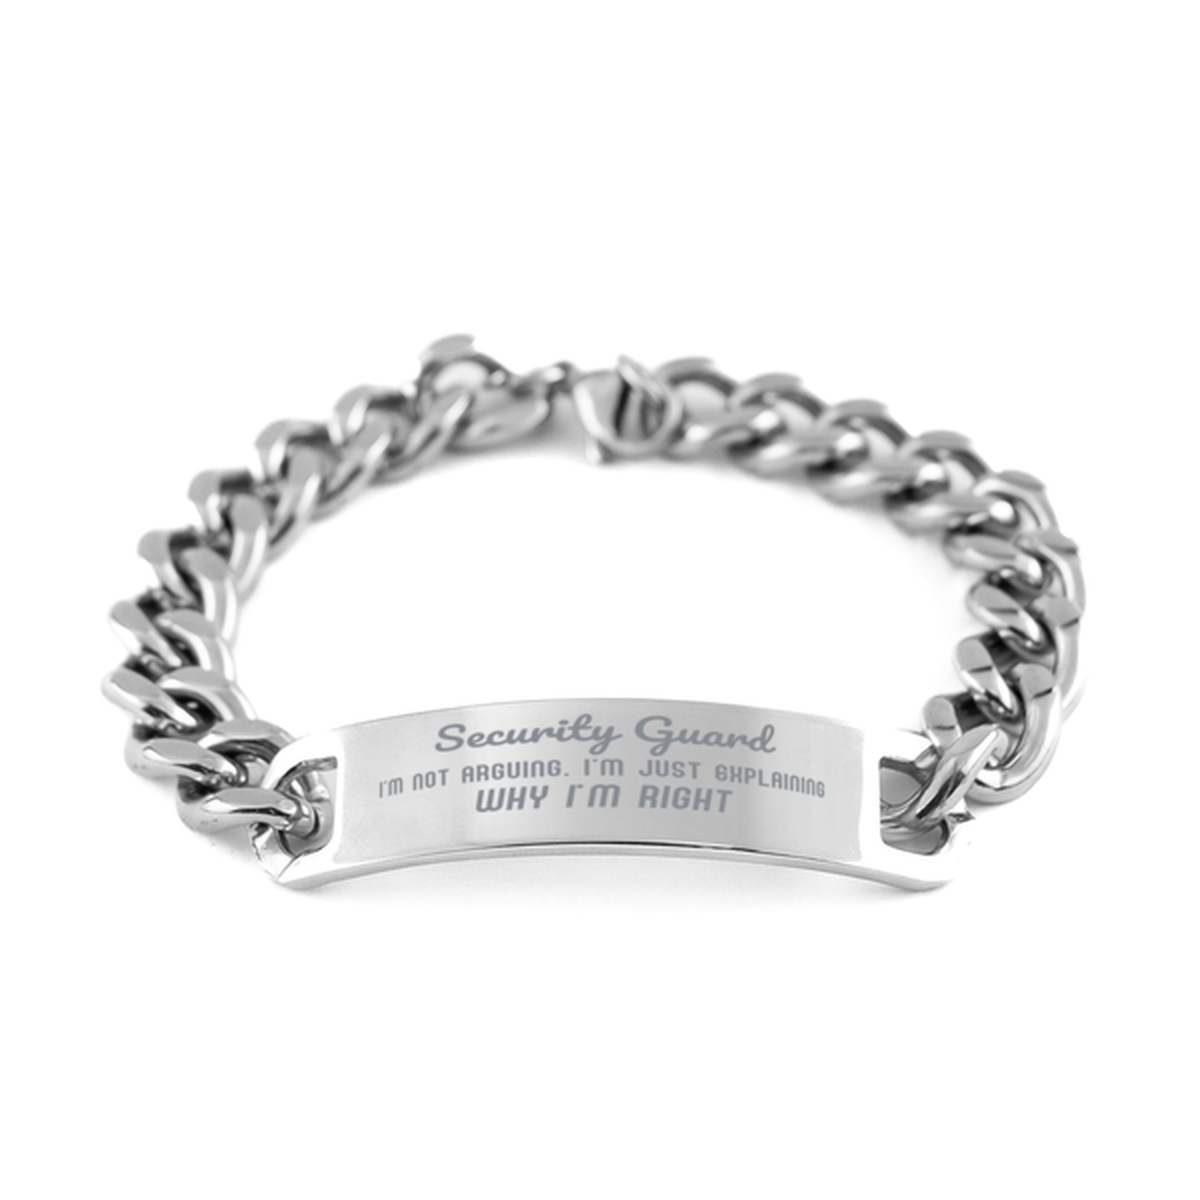 Security Guard I'm not Arguing. I'm Just Explaining Why I'm RIGHT Cuban Chain Stainless Steel Bracelet, Graduation Birthday Christmas Security Guard Gifts For Security Guard Funny Saying Quote Present for Men Women Coworker